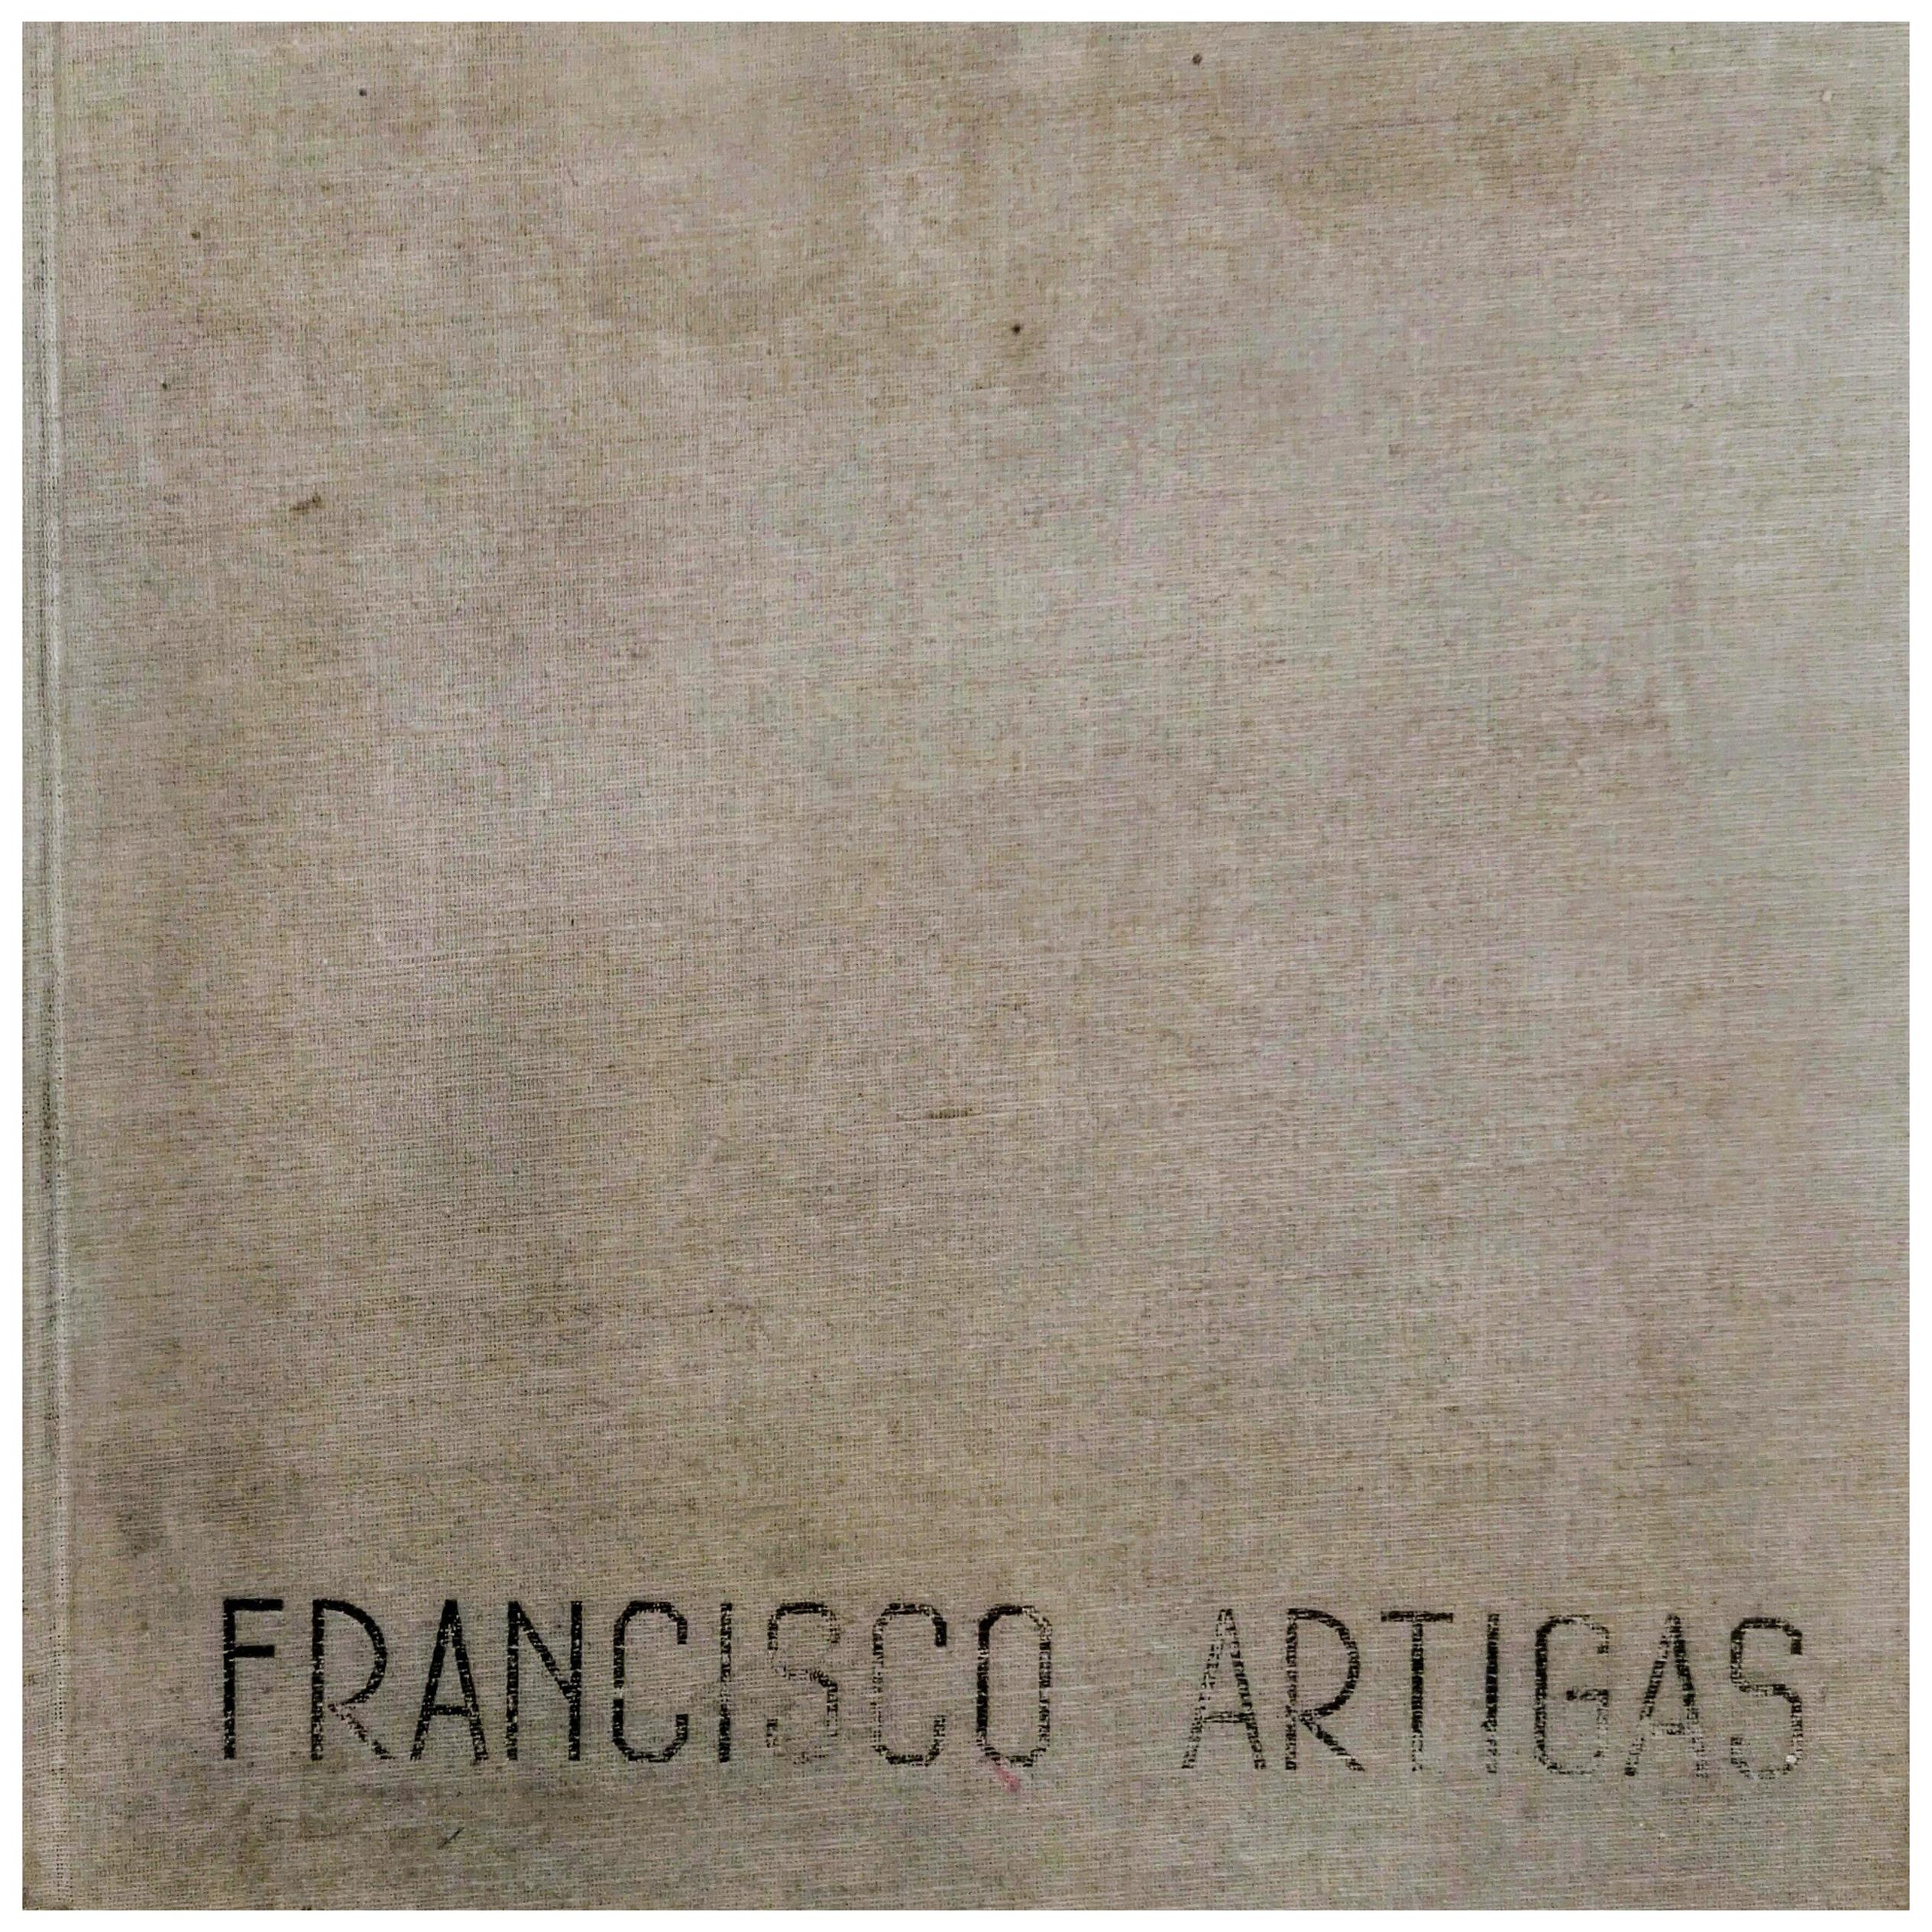 Francisco Artigas, Amazing Large Format Book on Mexican Modern Architecture